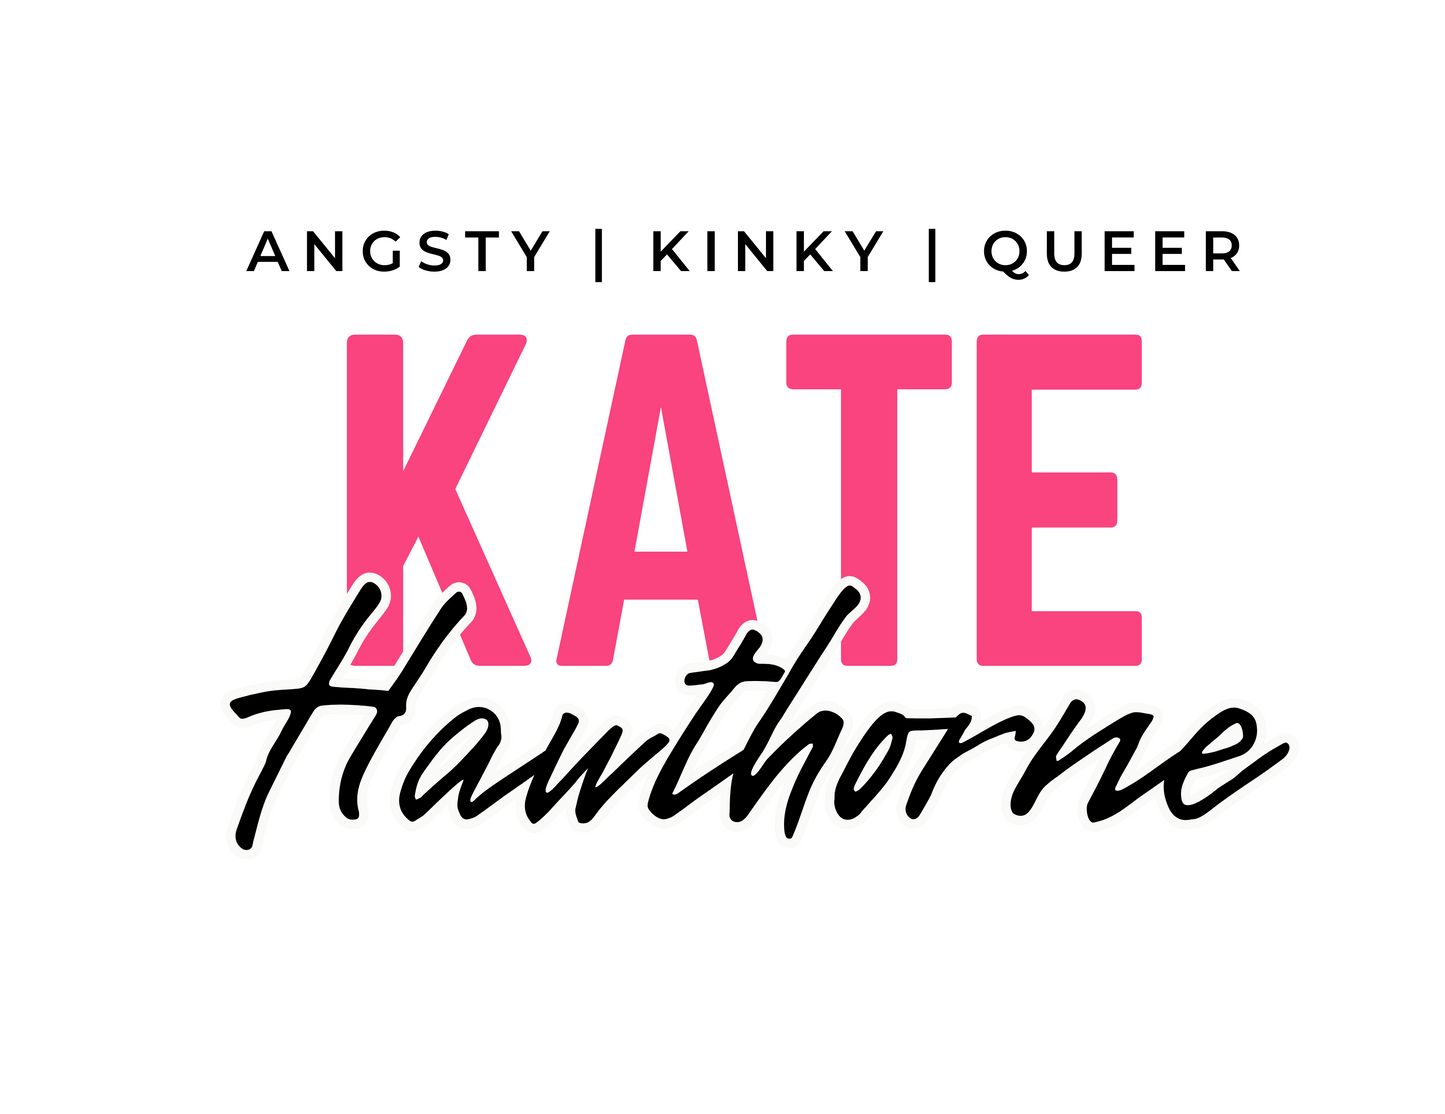 Kate Hawthorne Collection